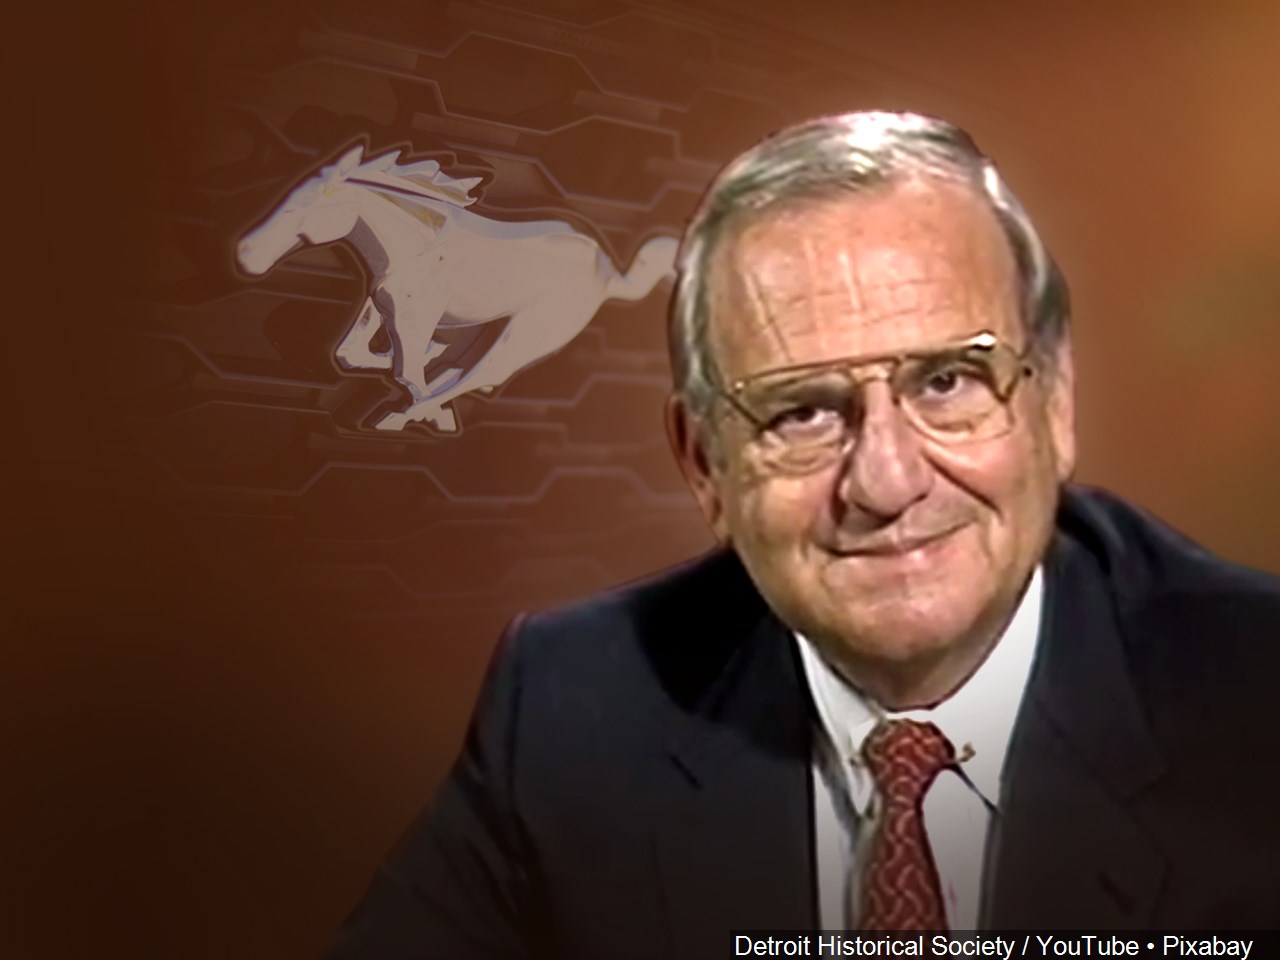 Fallece Lee Iacocca padre del icónico Ford Mustang